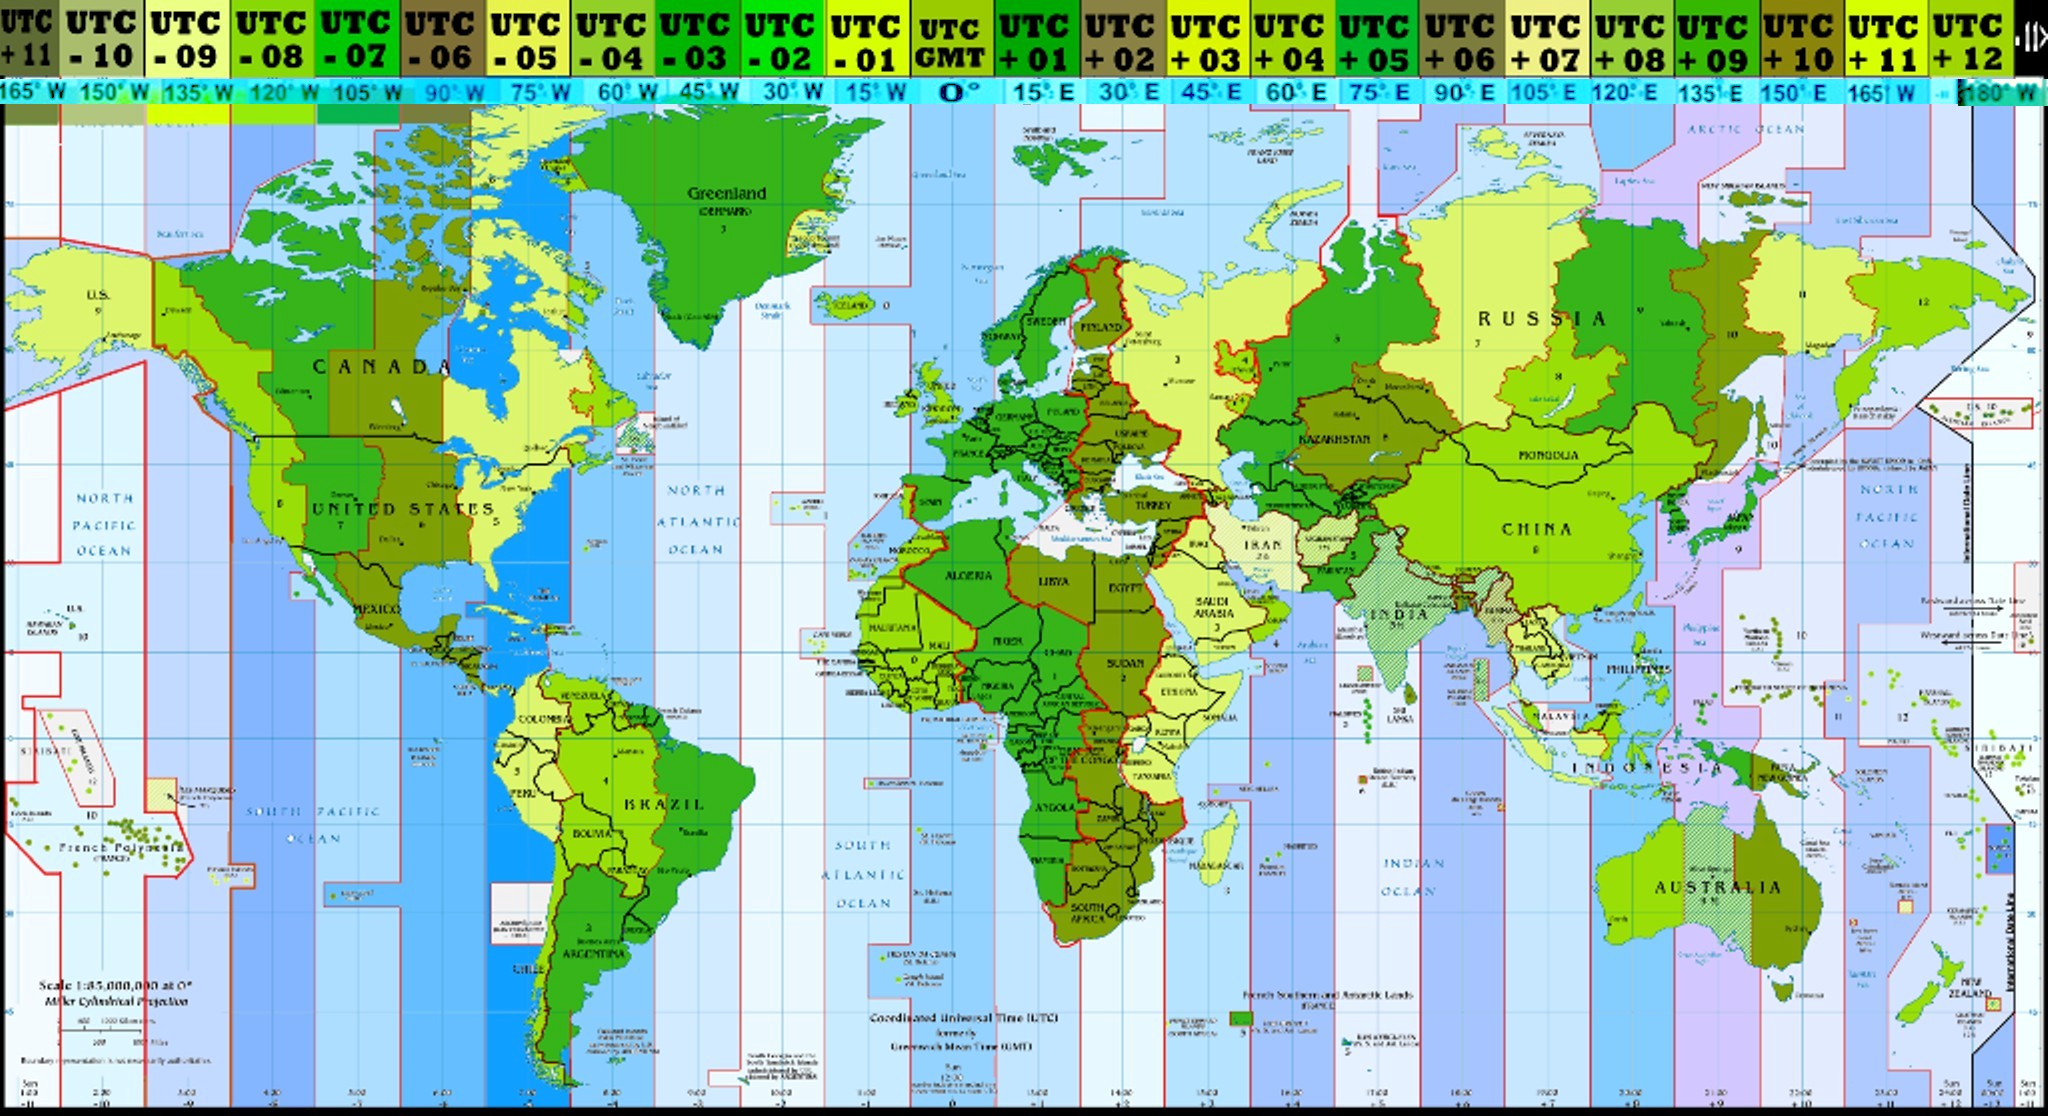 world time zones converting table